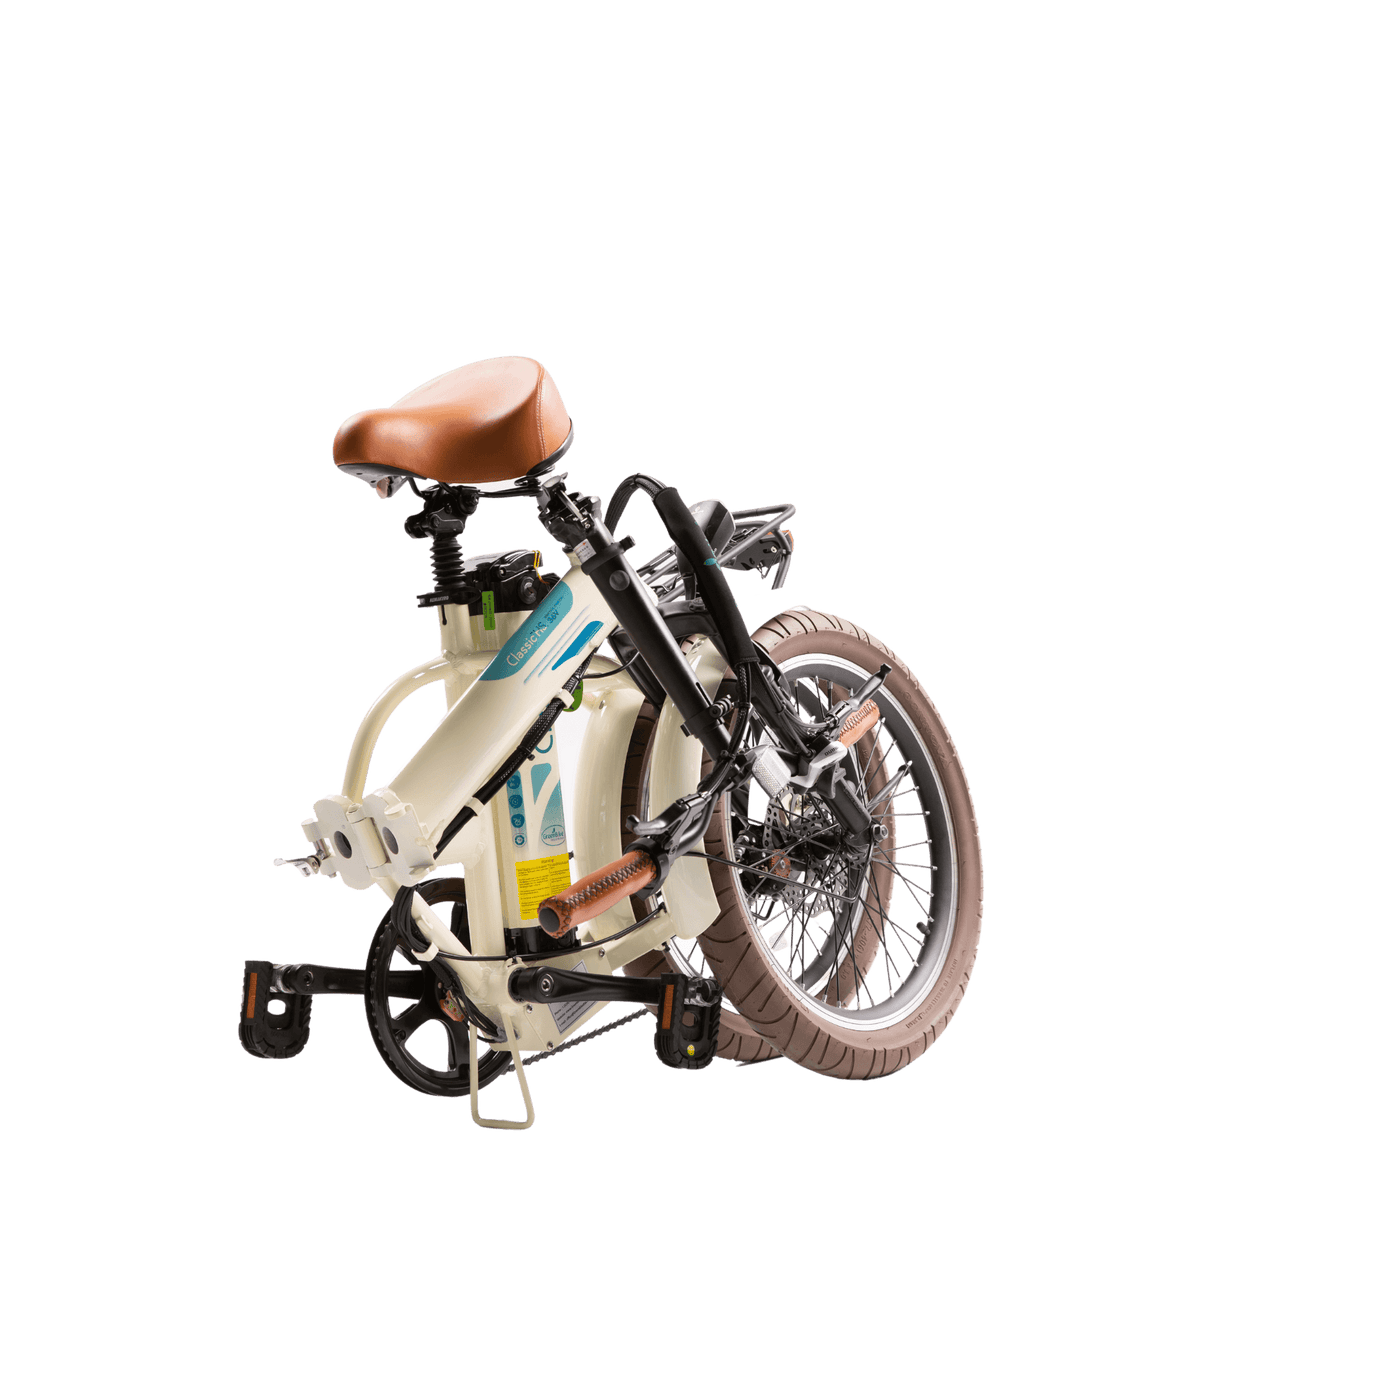 GreenBike Classic Foldable Electric City Bicycle Folded View